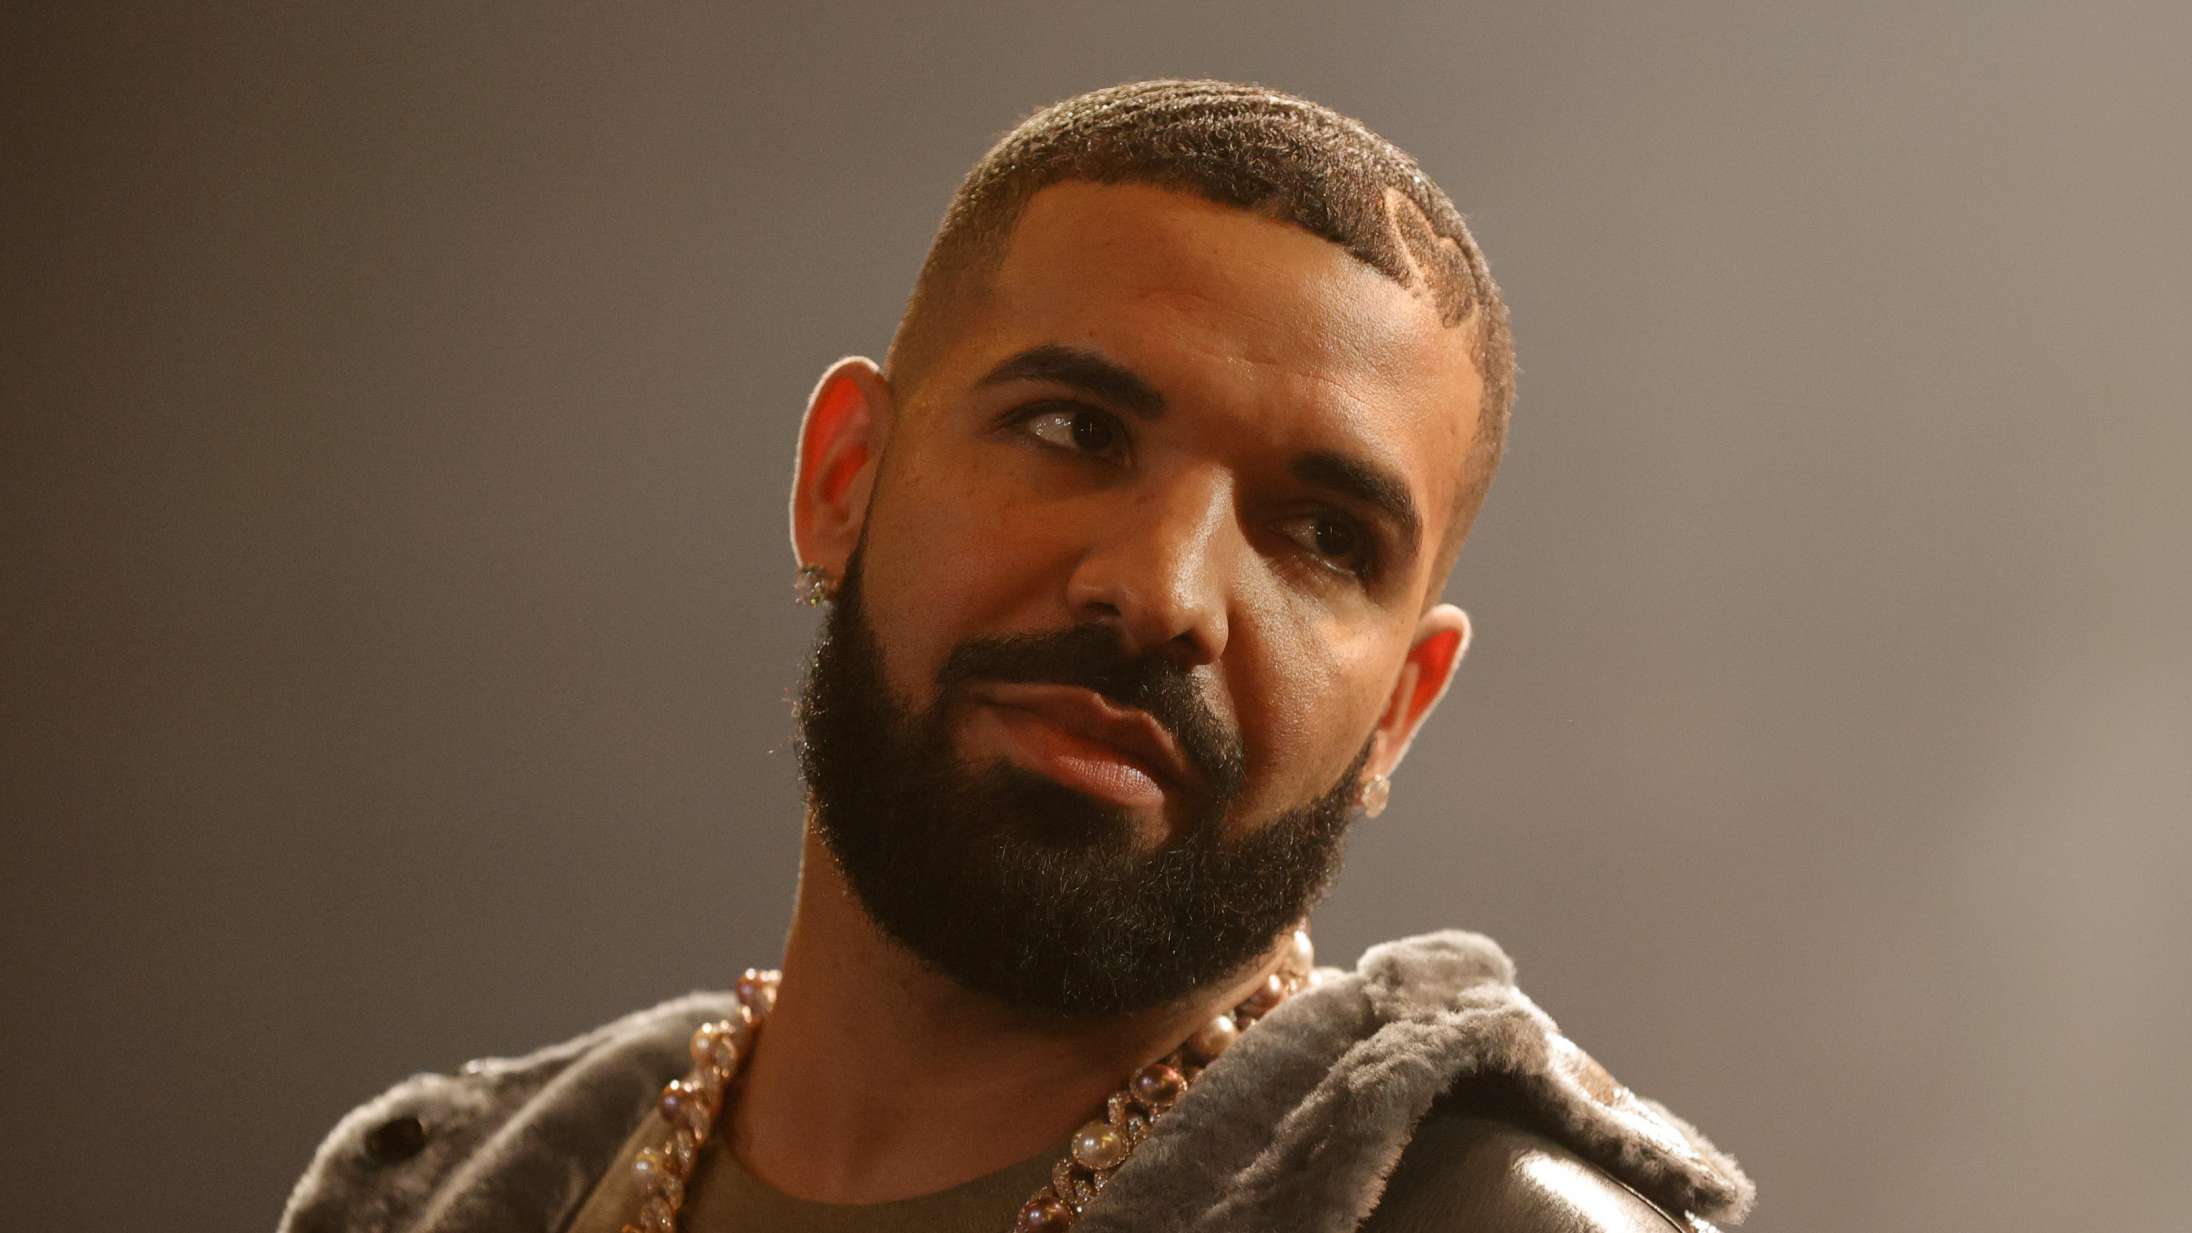 Drake Shocked By Huge Bra Thrown On Stage: 'This Can't Be Real